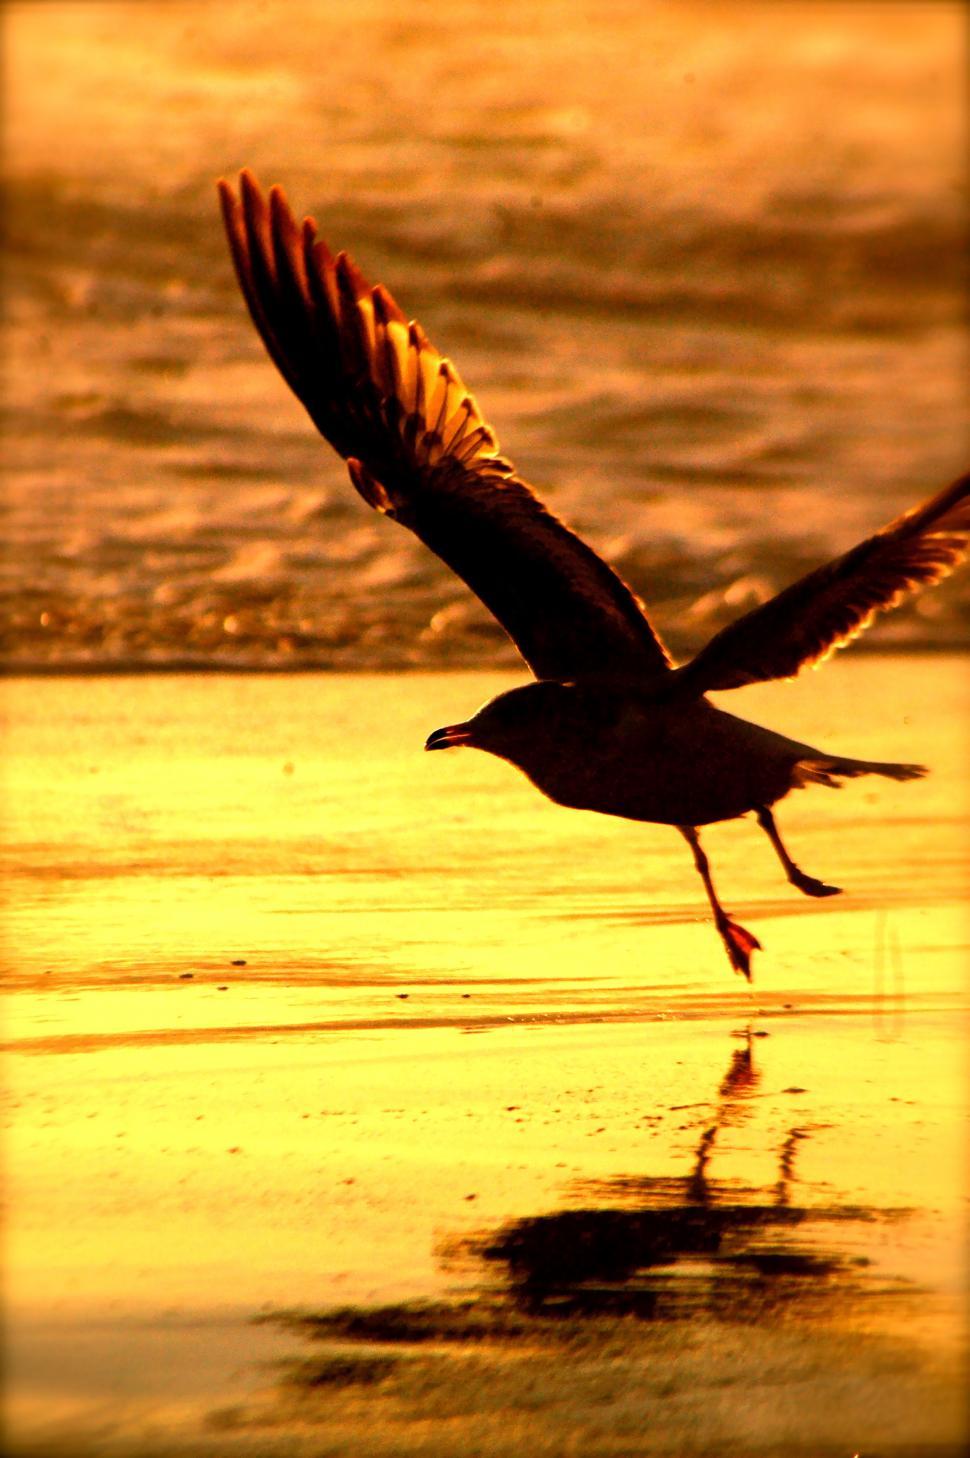 Free Image of Bird takes Flight by the Ocean Beach 